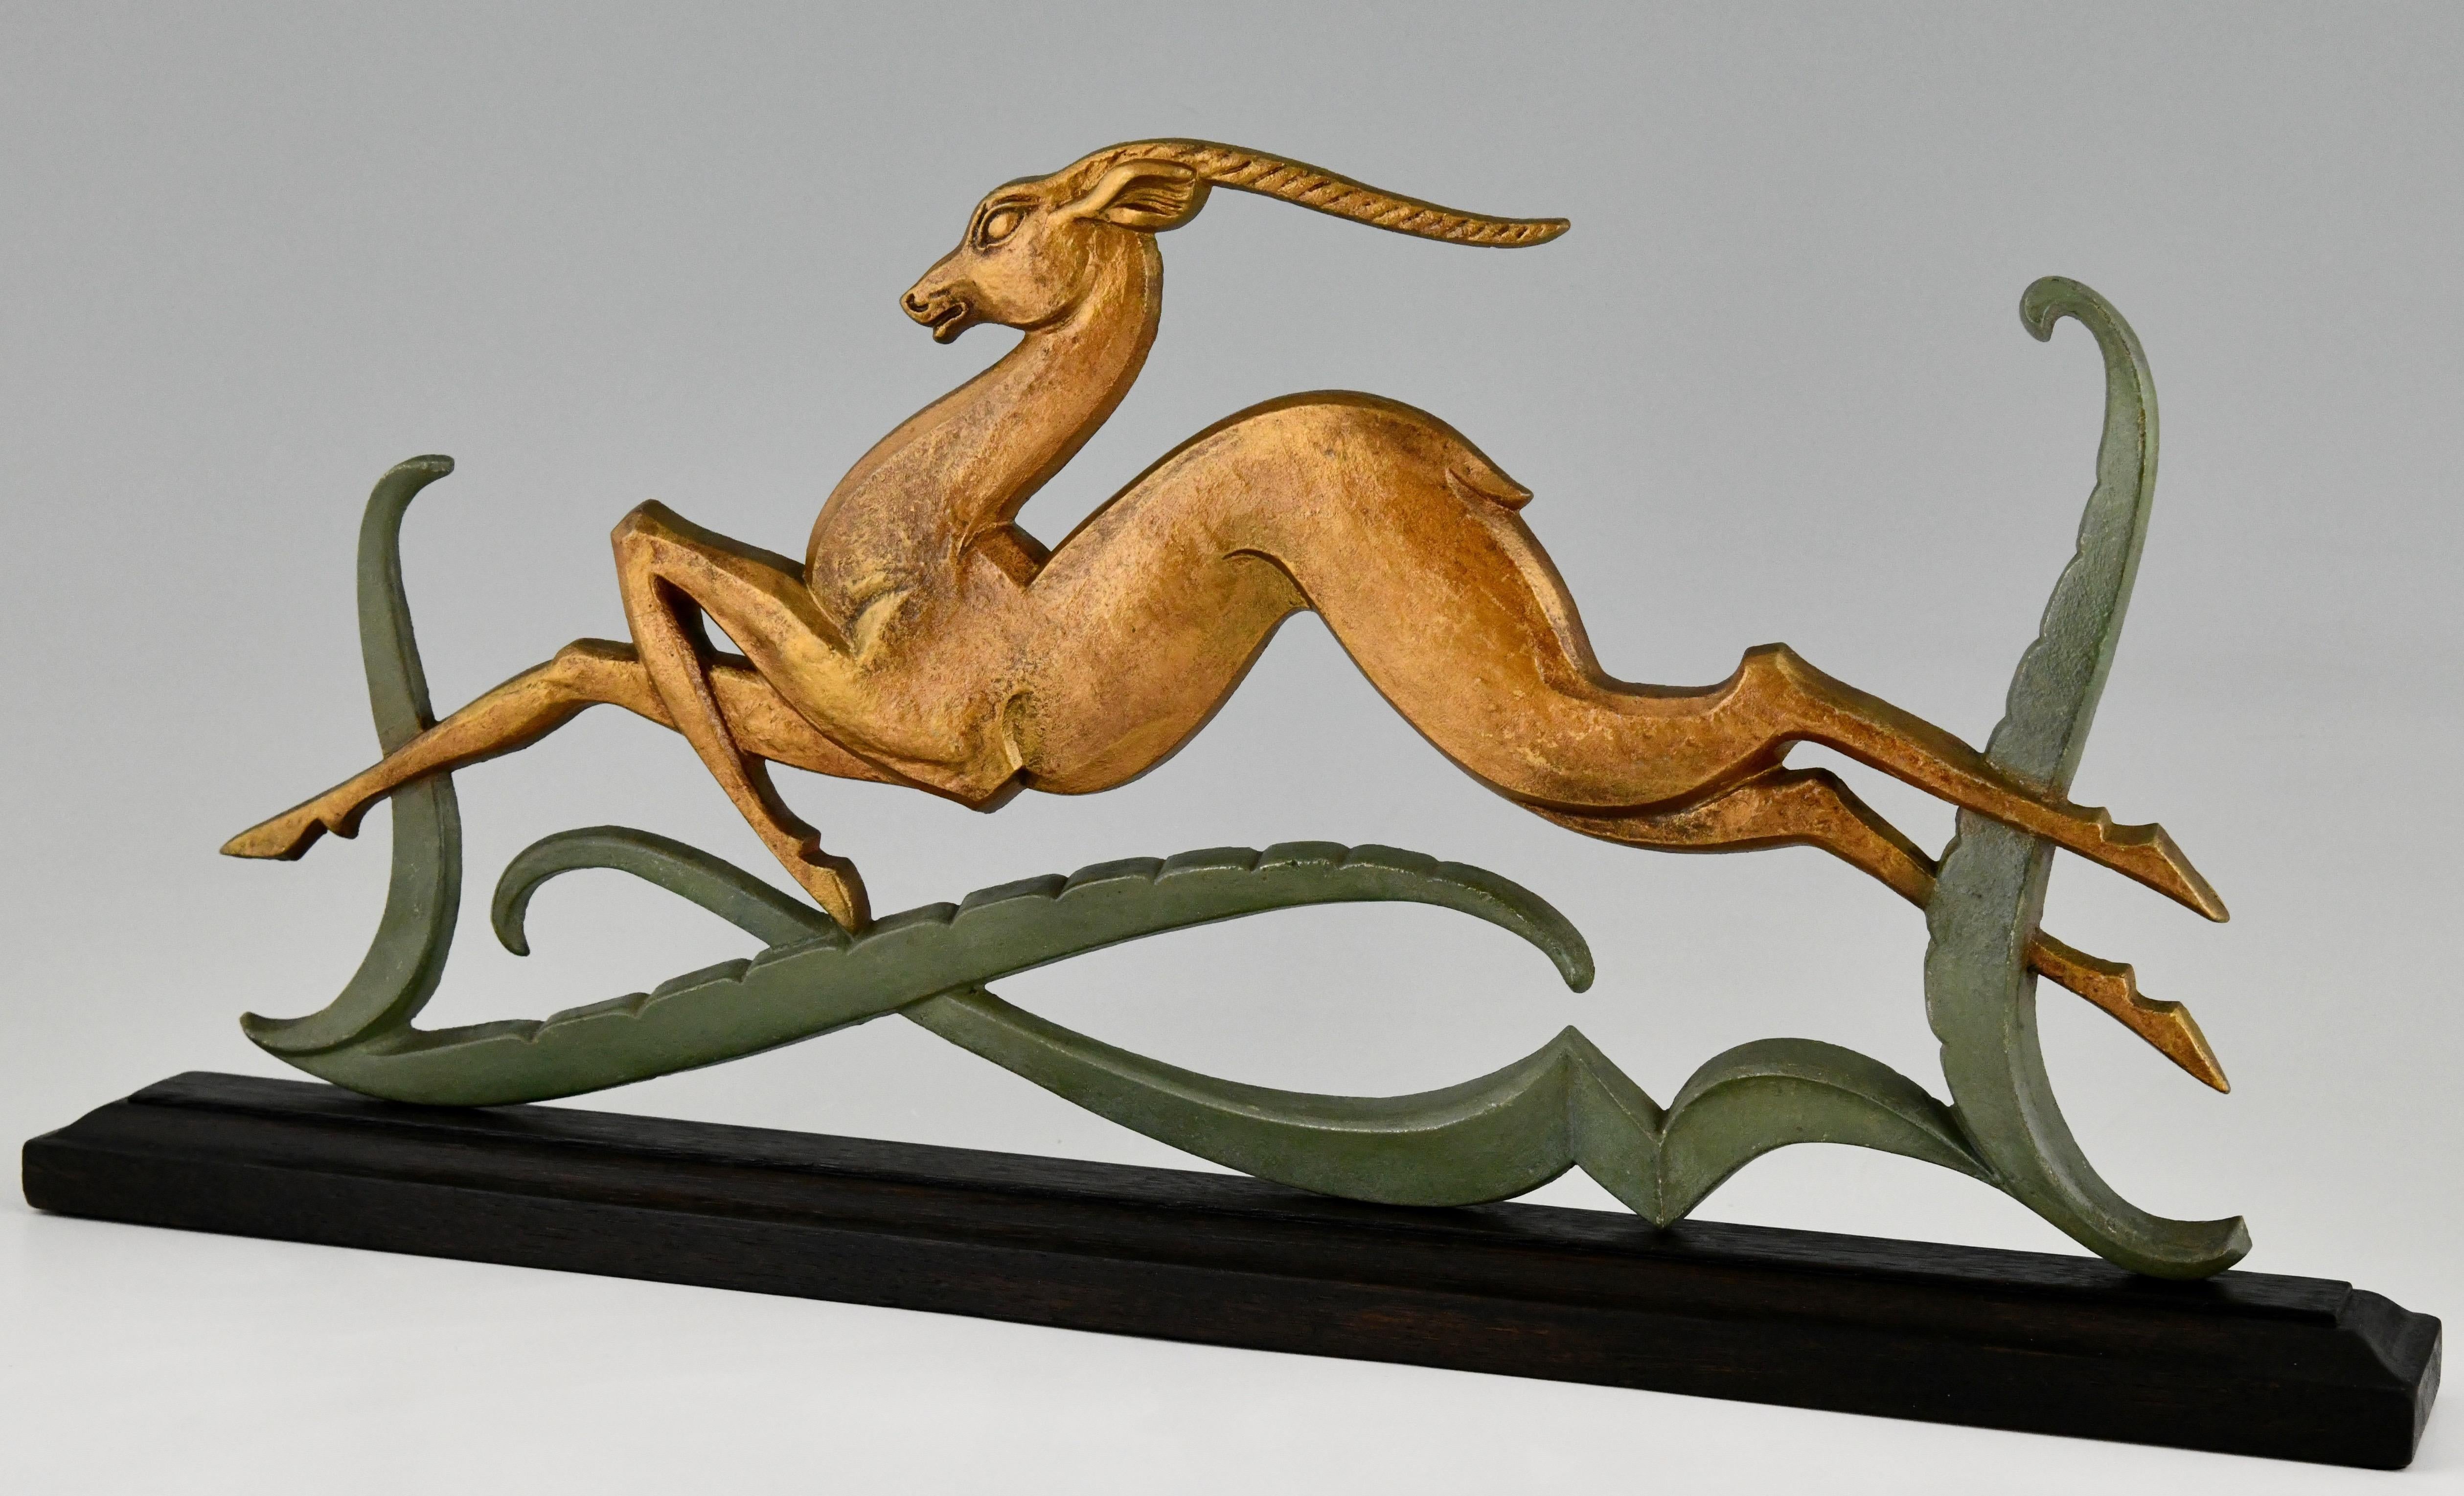 Patinated Art Deco Sculpture Leaping Deer, France, 1930